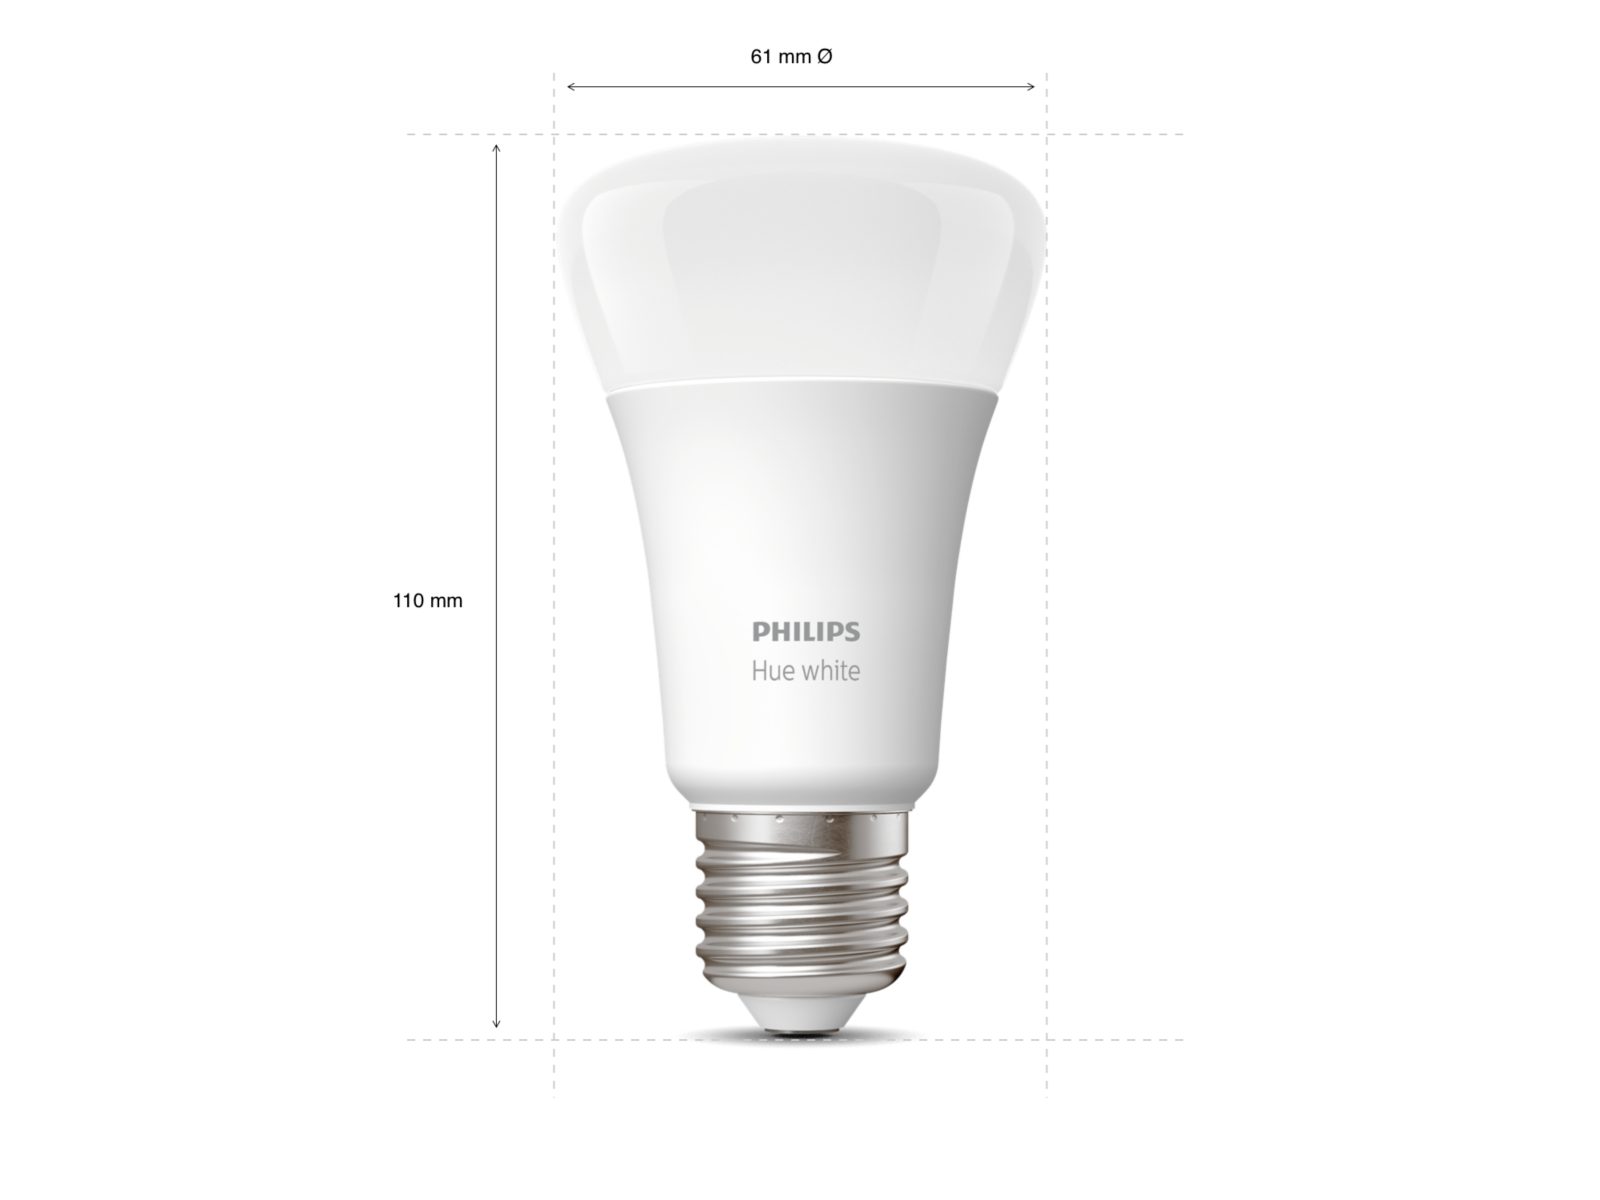 a philips hue smart light bulb with measurements for height and width